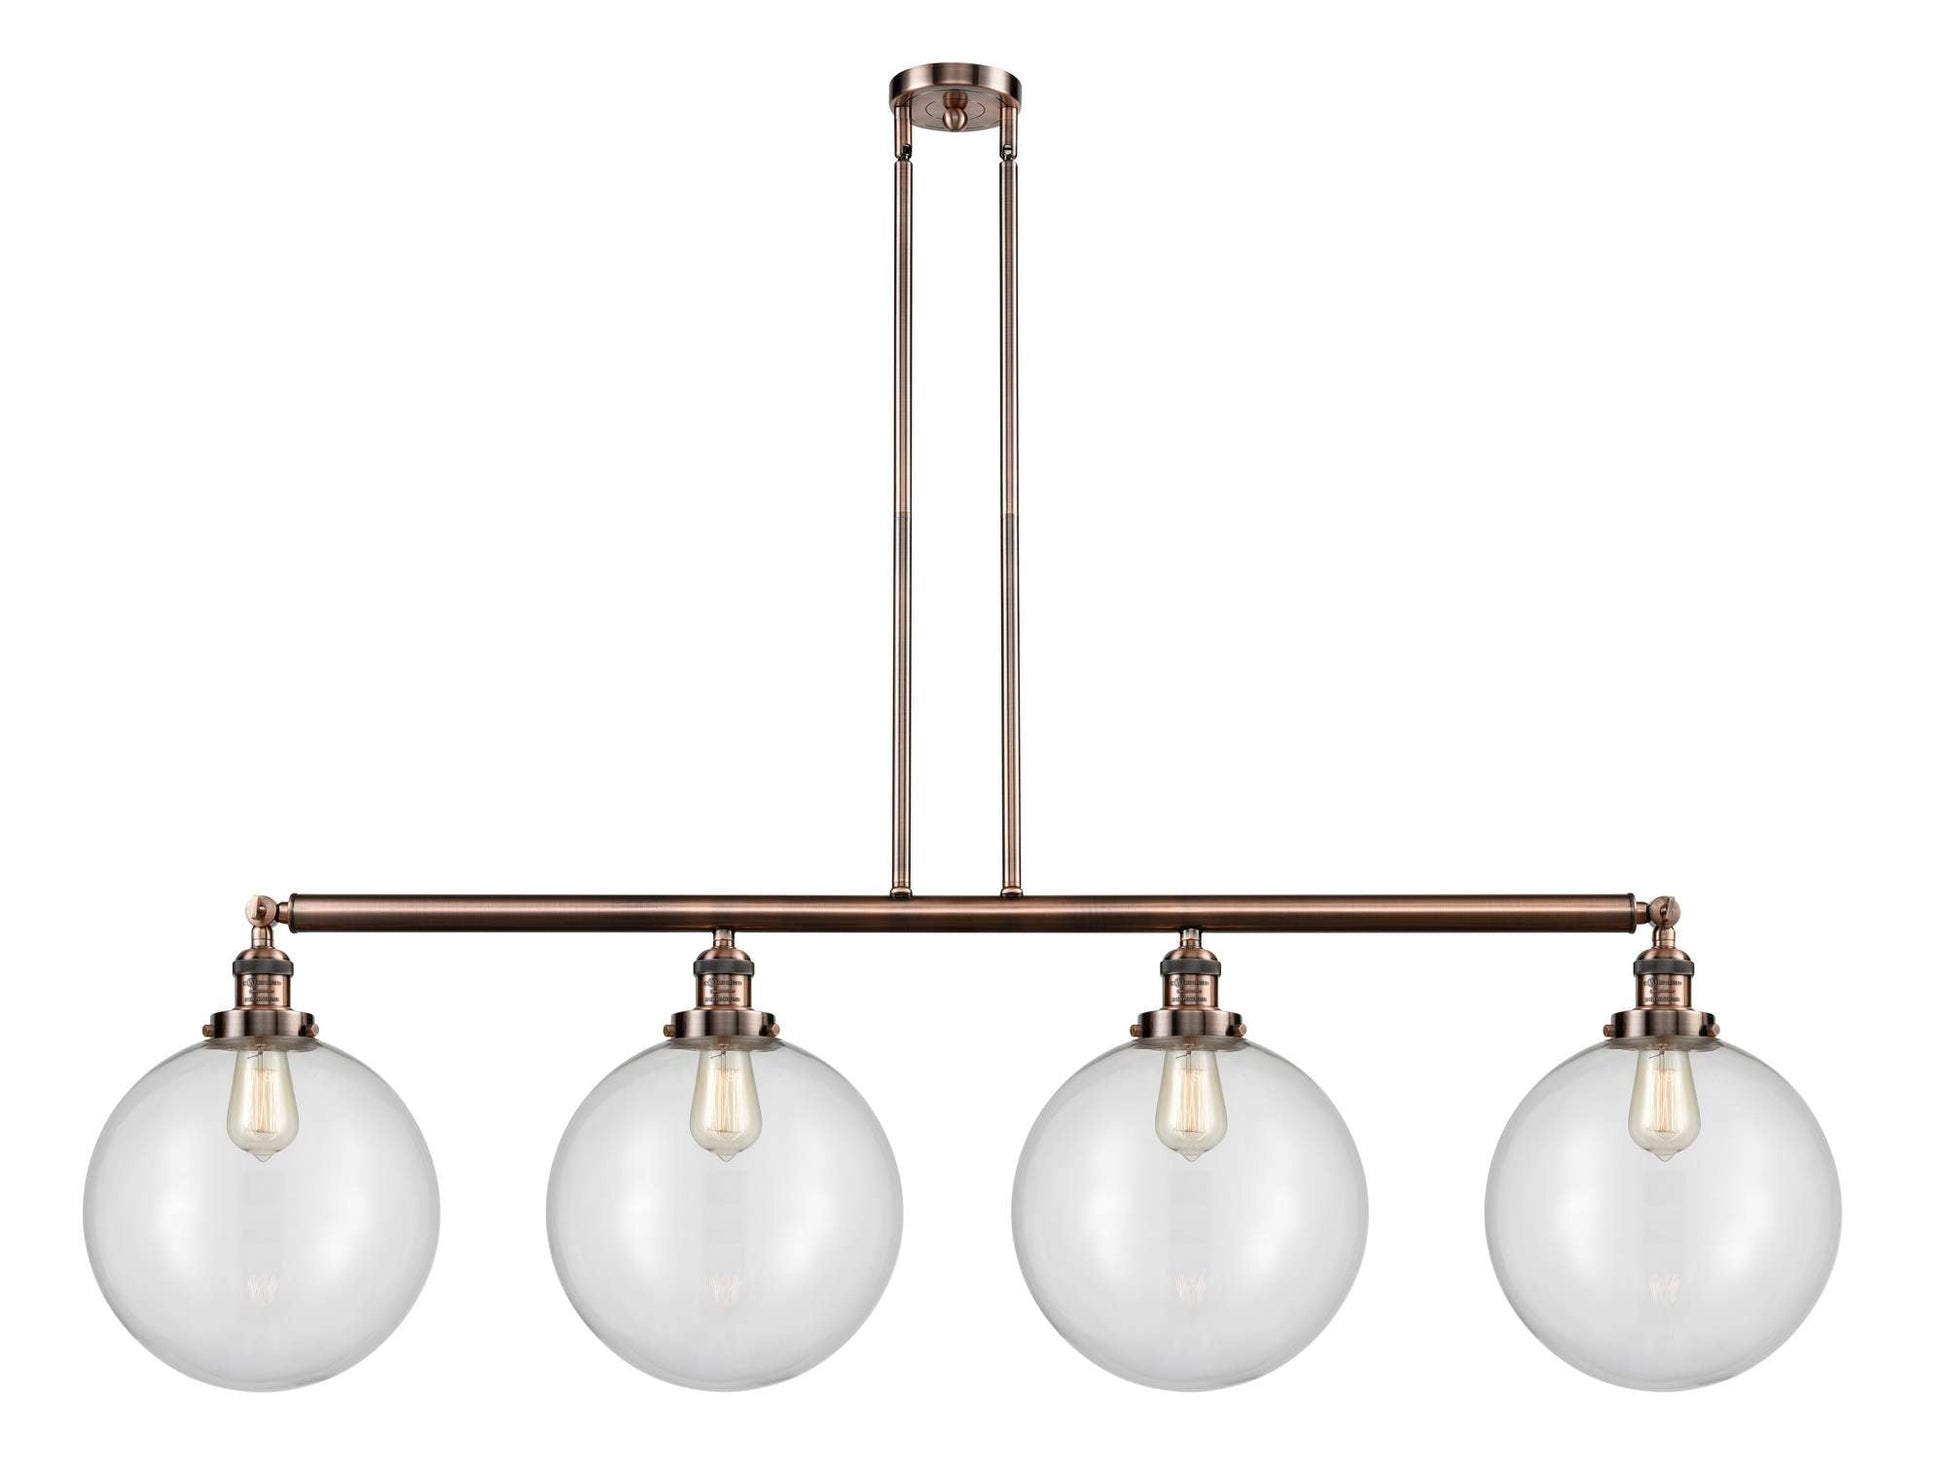 214-AC-G202-12 4-Light 56" Antique Copper Island Light - Clear Beacon Glass - LED Bulb - Dimmensions: 56 x 12 x 16<br>Minimum Height : 26<br>Maximum Height : 50 - Sloped Ceiling Compatible: Yes